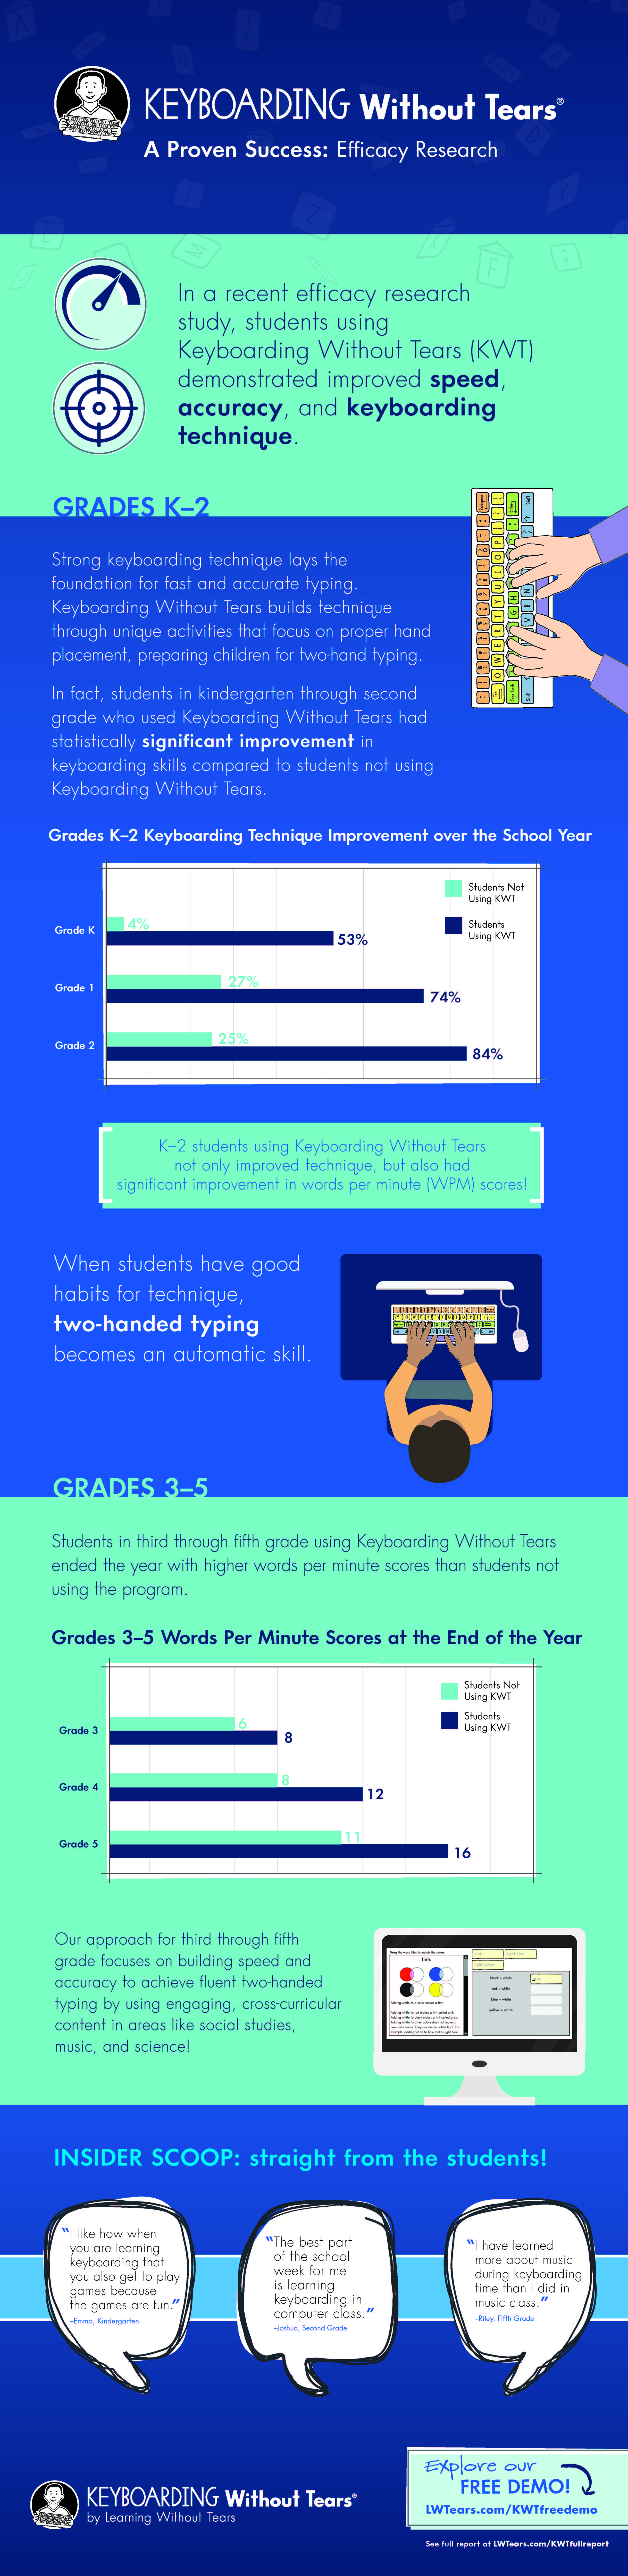 Keyboarding Without Tears Research Infographic